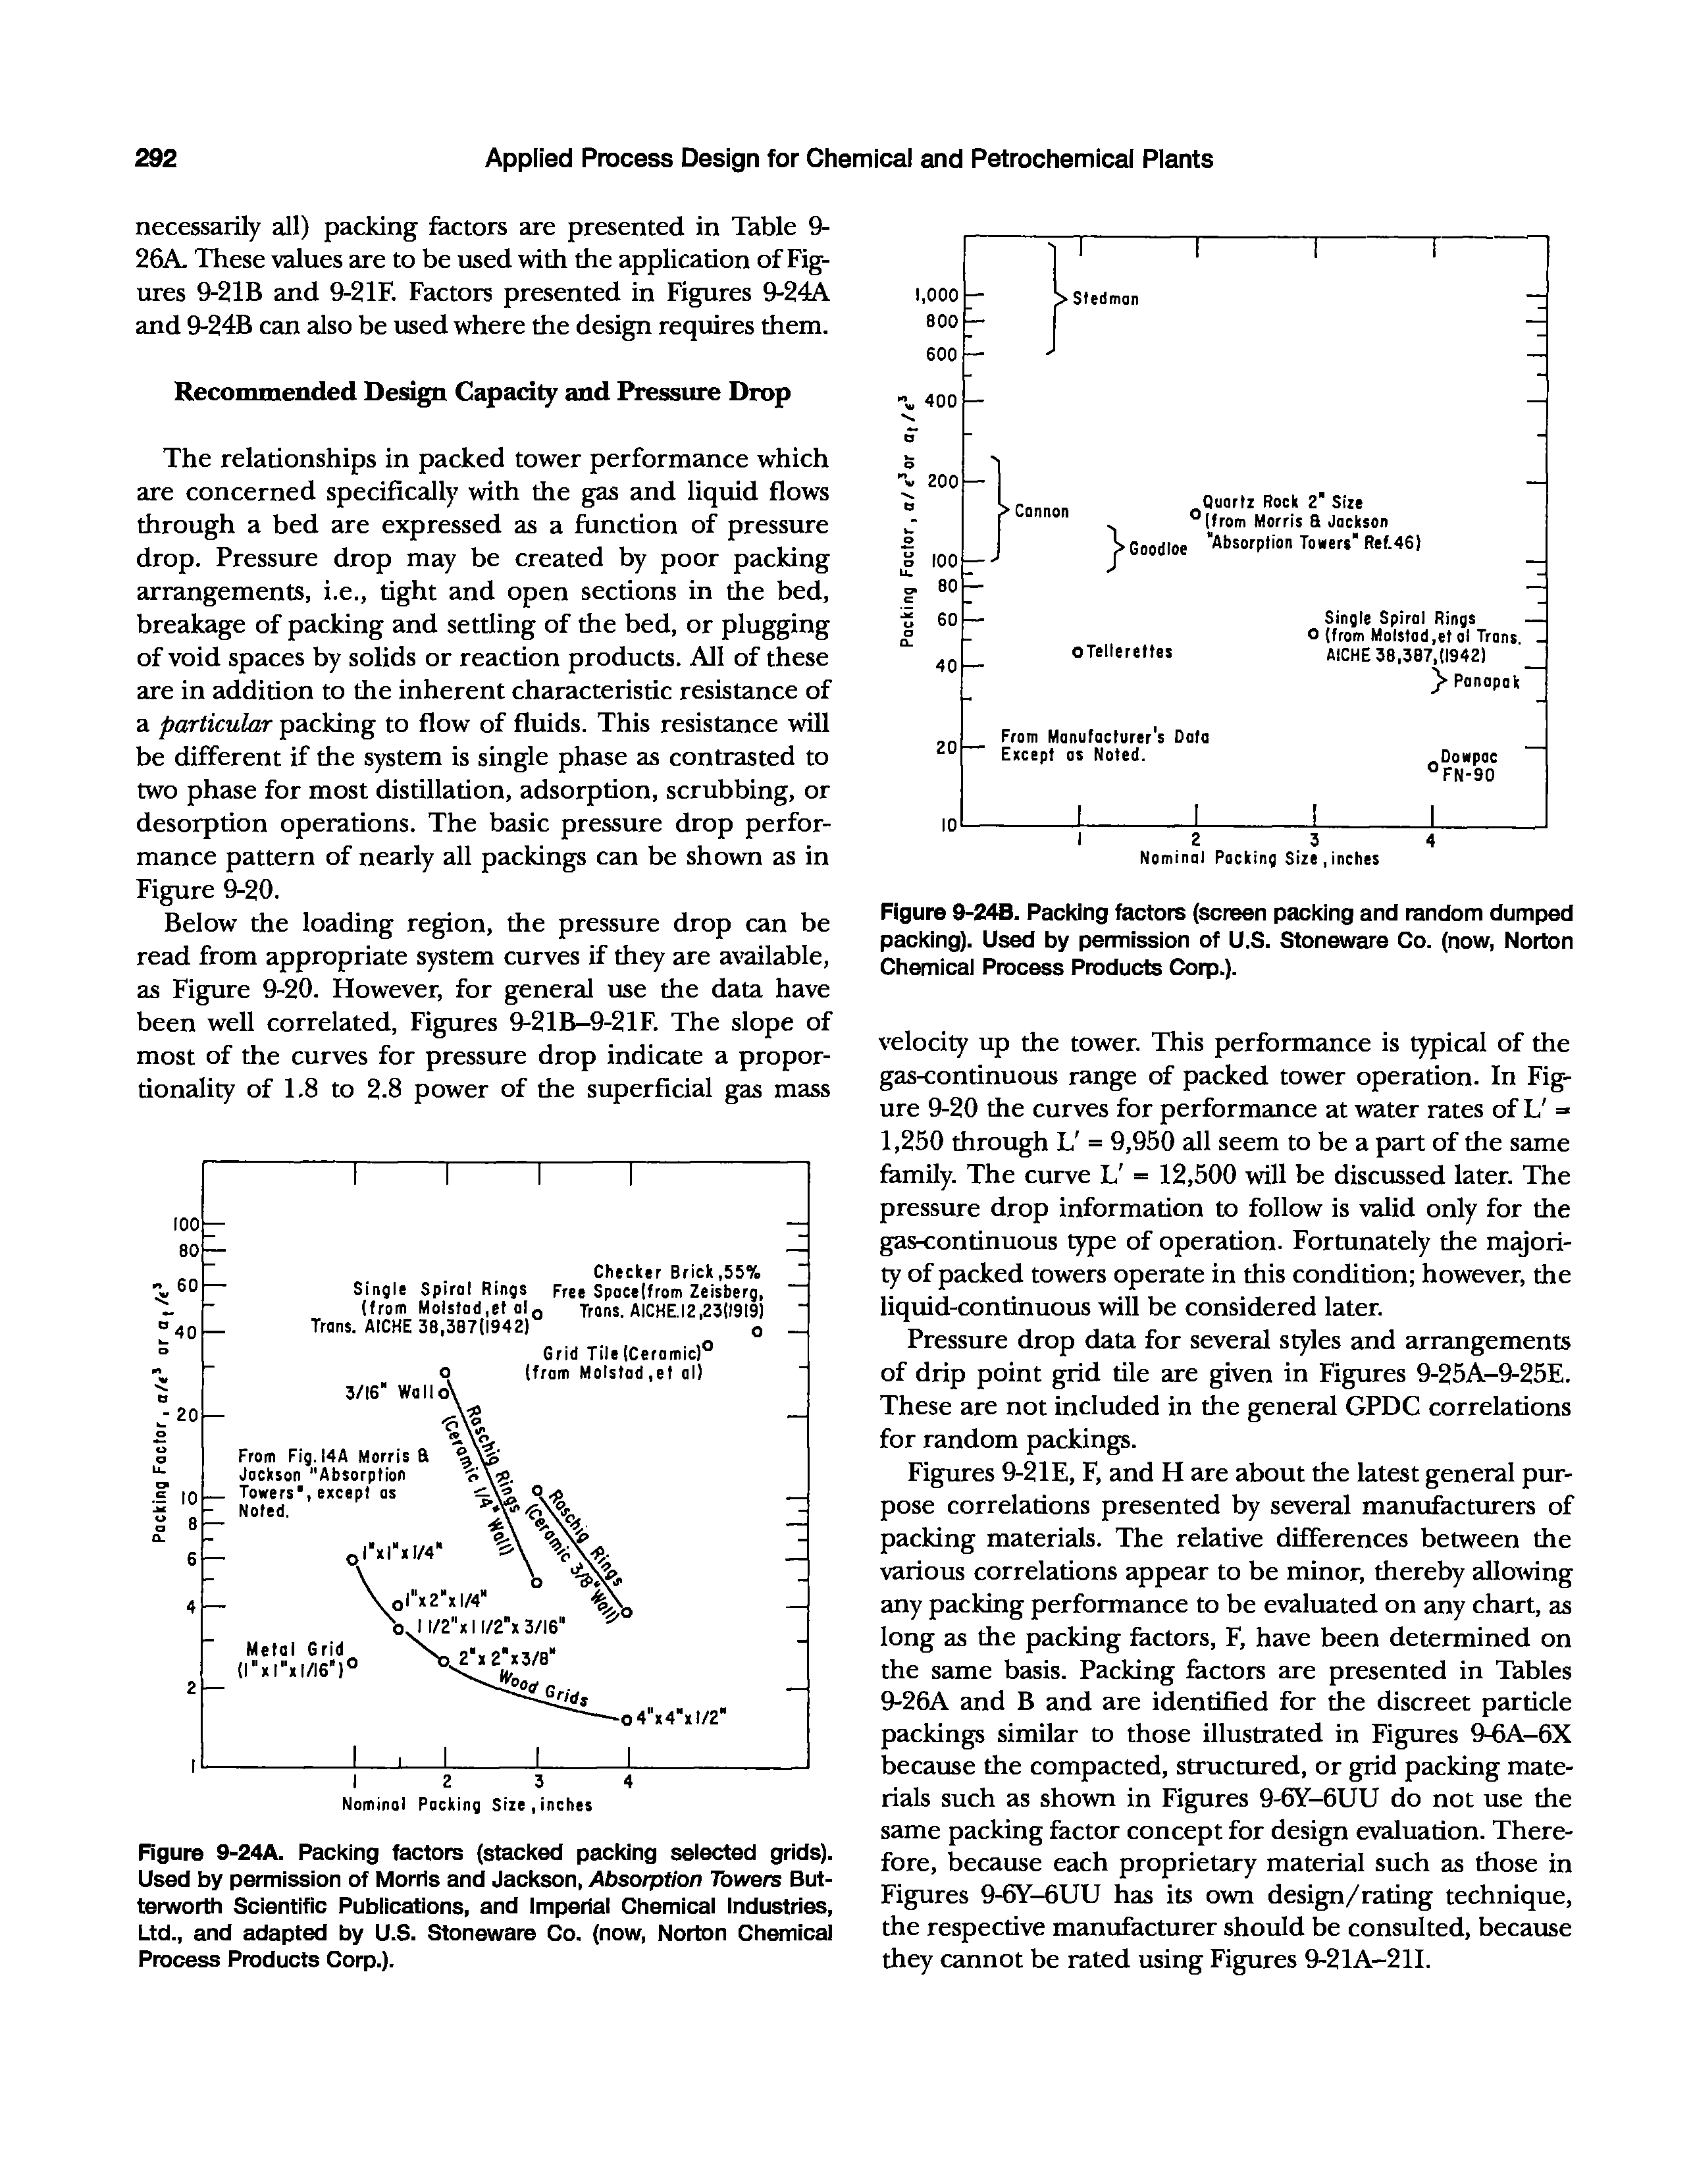 Figure 9-24B. Packing factors (screen packing and random dumped packing). Used by permission of U.S. Stoneware Co. (now, Norton Chemical Process Products Corp.).